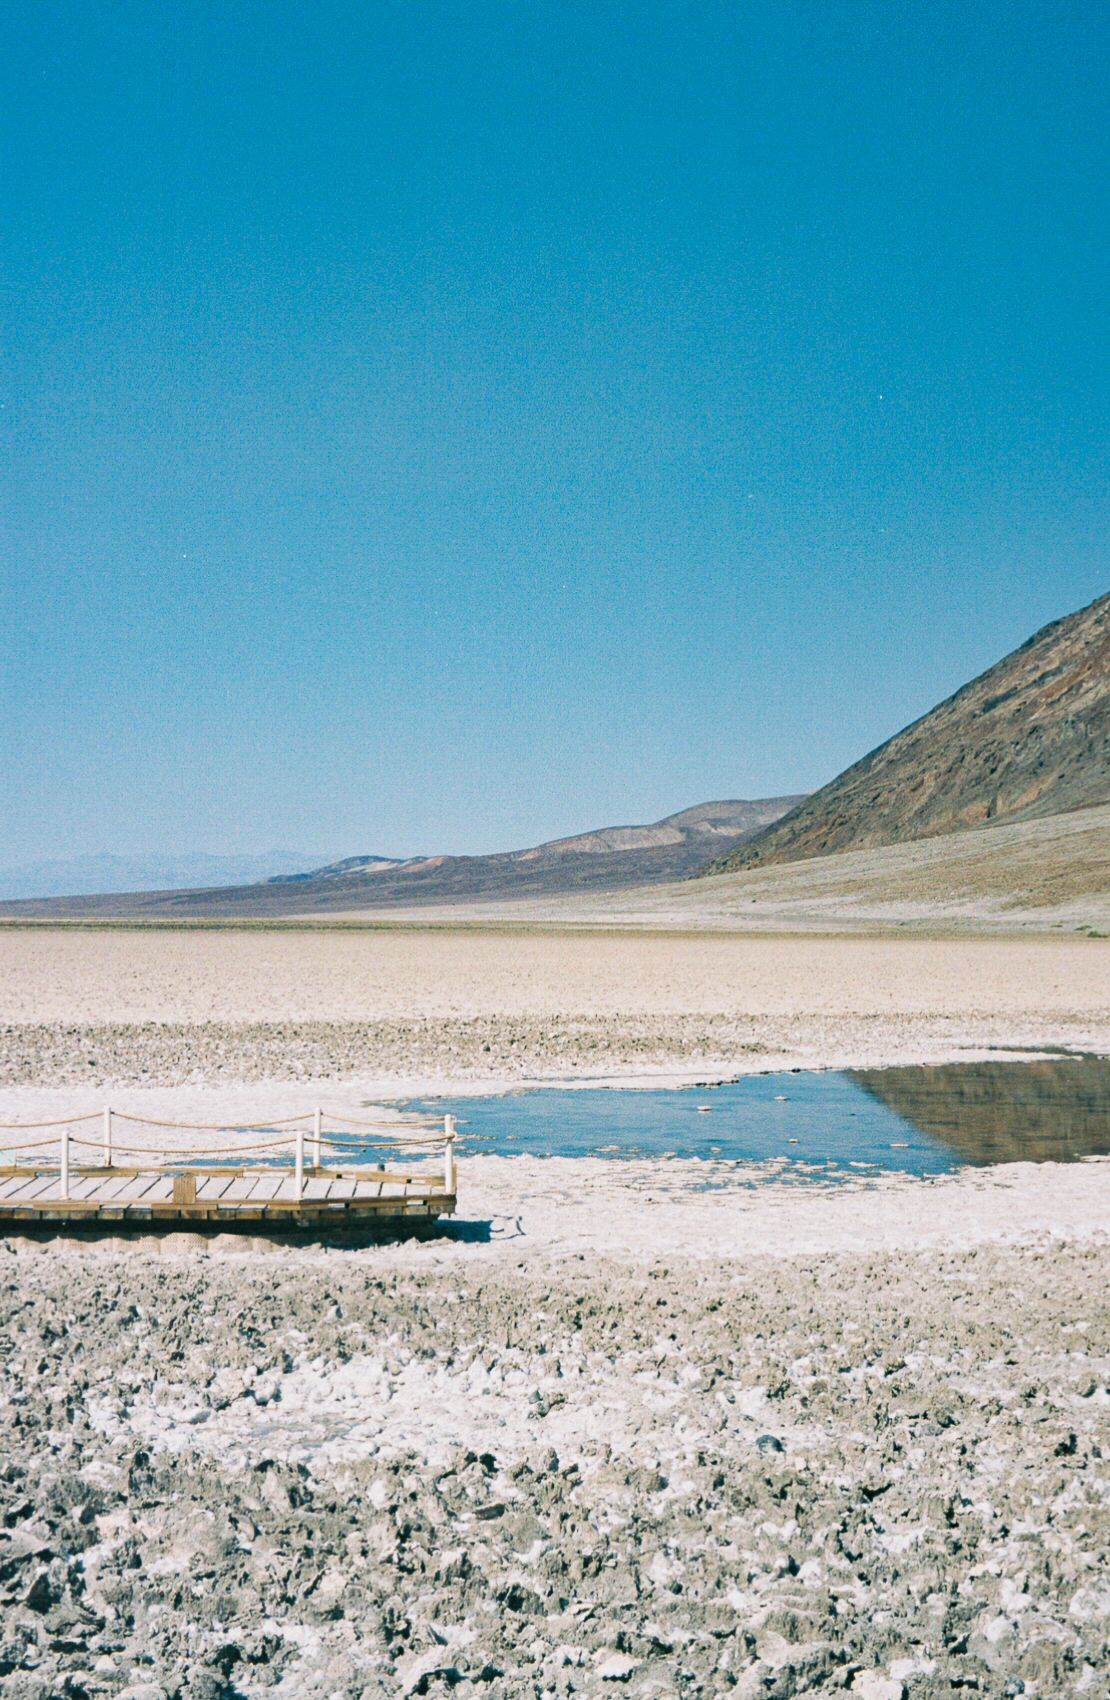 A wooden walkway next to a small pool of standing water at the salt plain floor of Death Valley